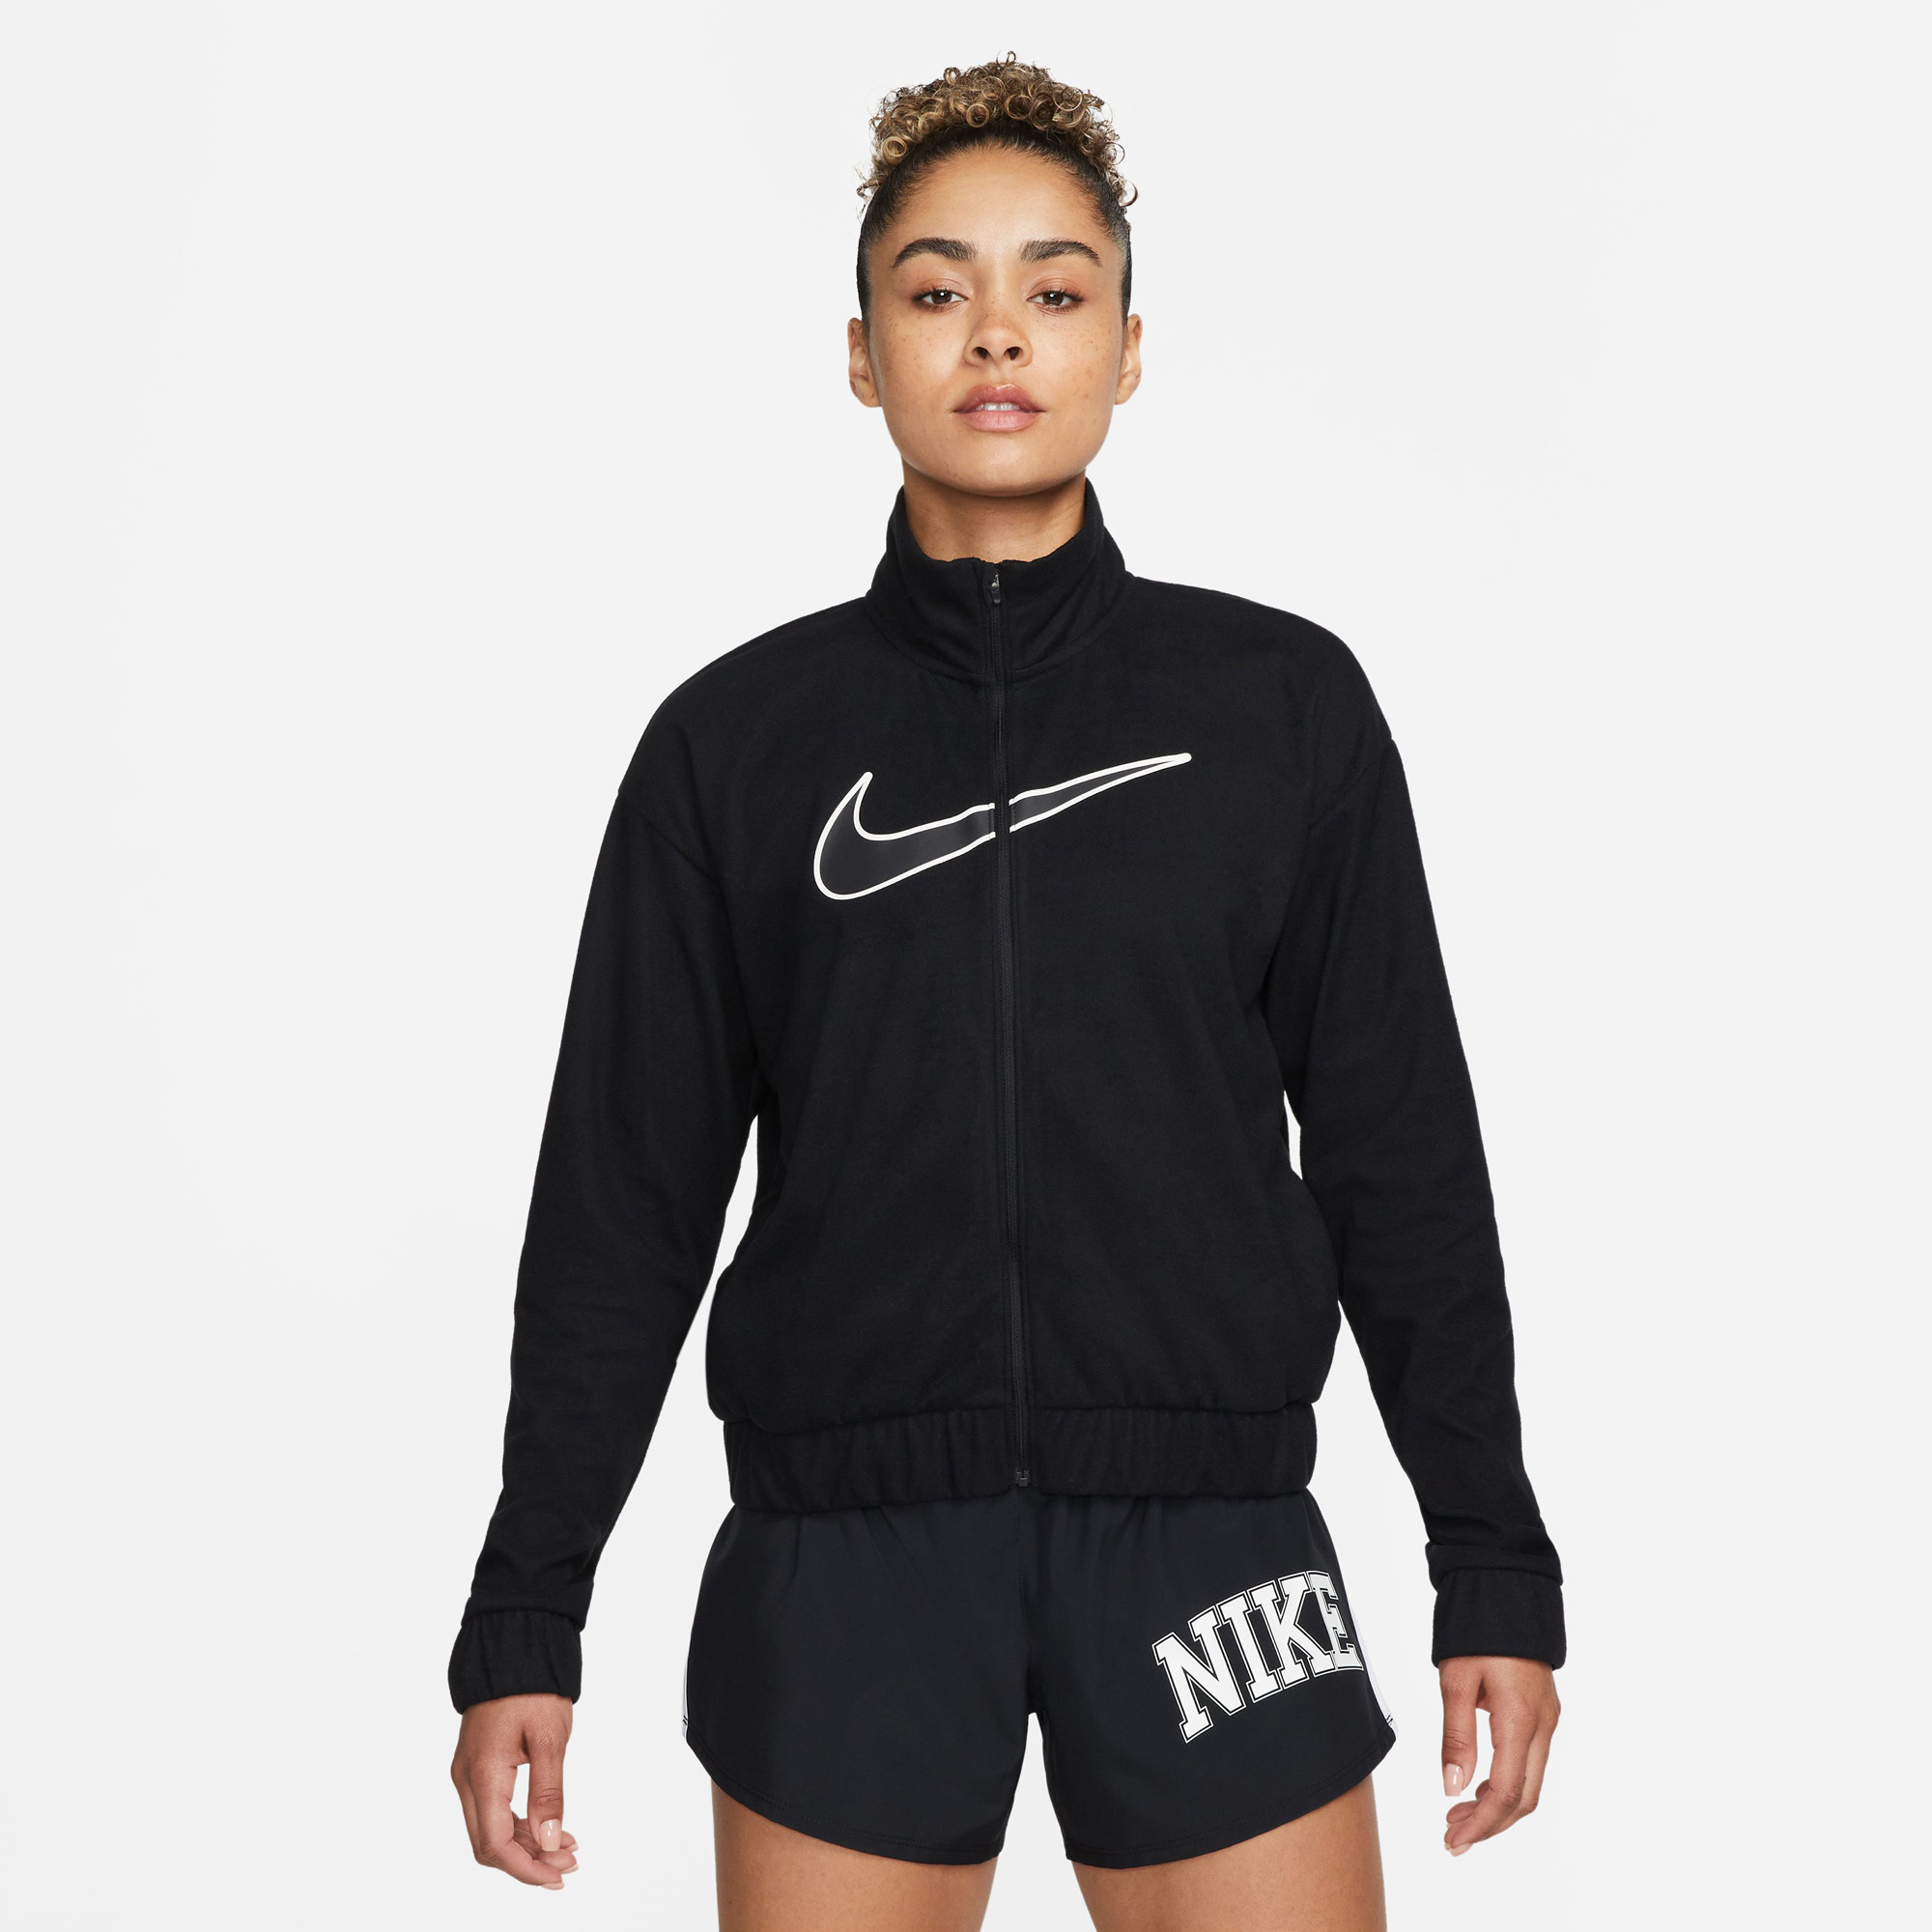 Chaqueta Nike mujer outlet | Intersport